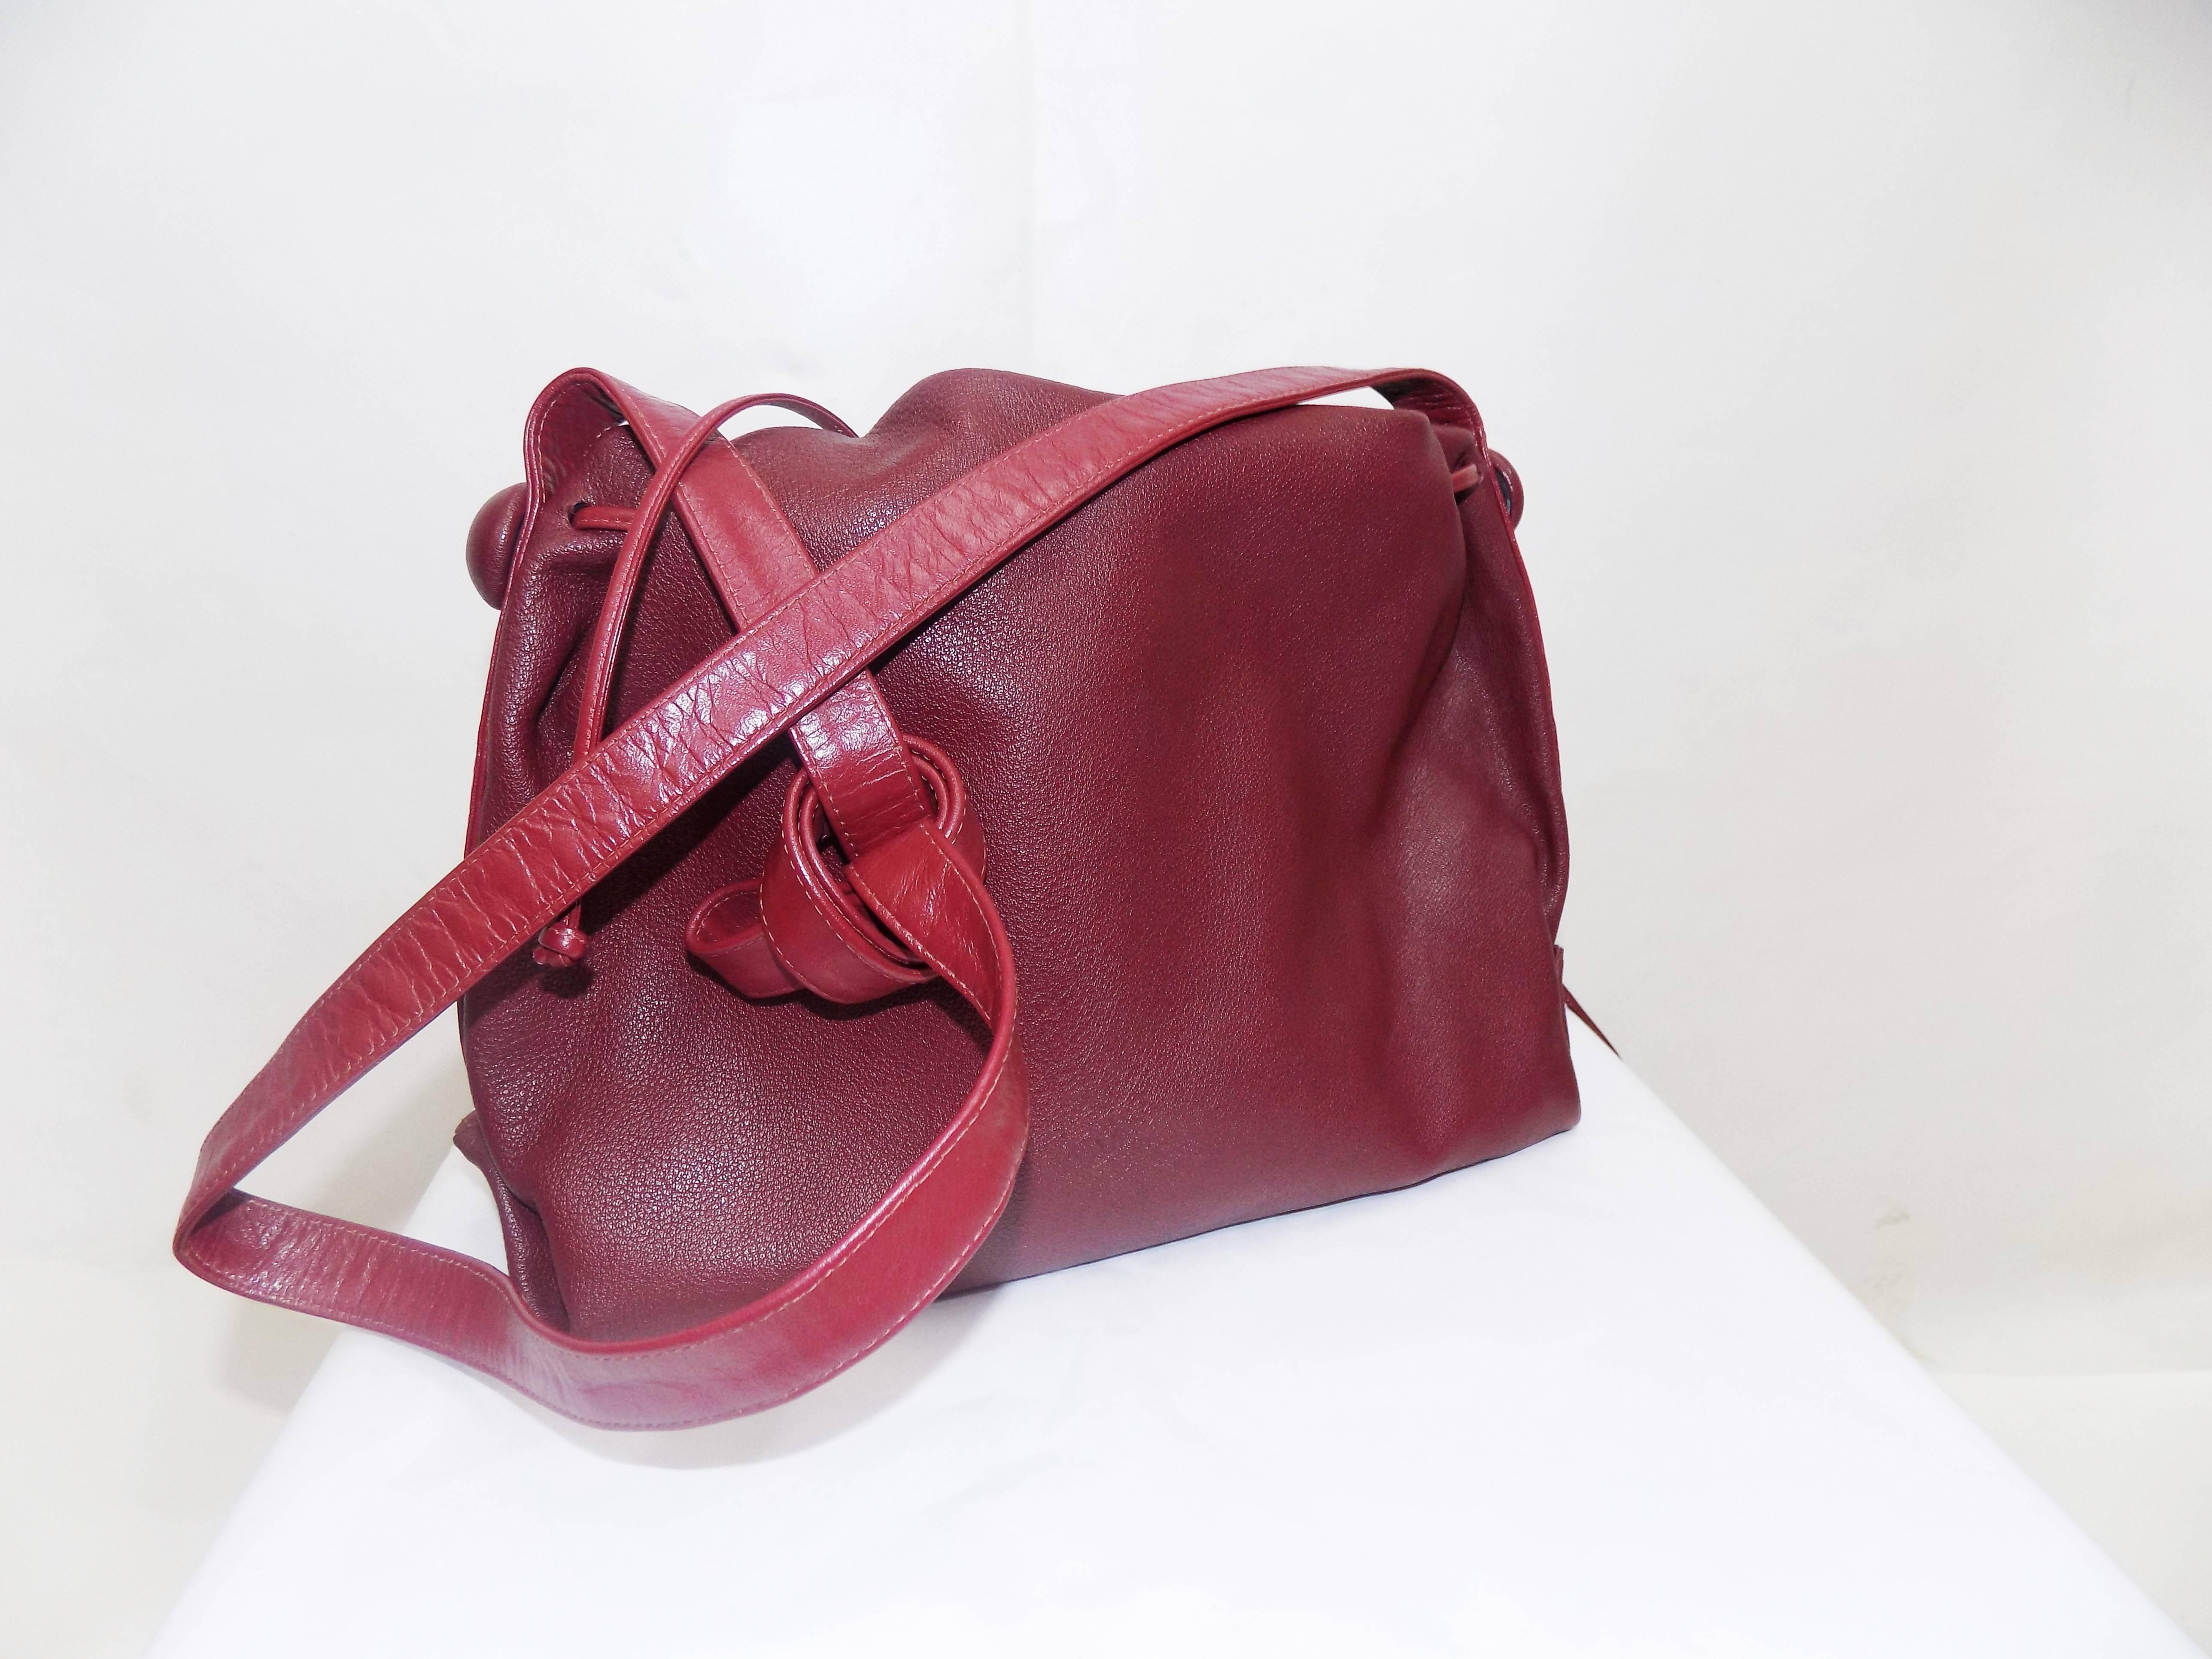 Carlos Falchi's signature beautiful burgundy red color  textured calfskin adjustable drawstring cross-body bag.Large size  measures 11" in length. The height measures 7", depth is 4". The shoulder strap "25 drop .. Available in